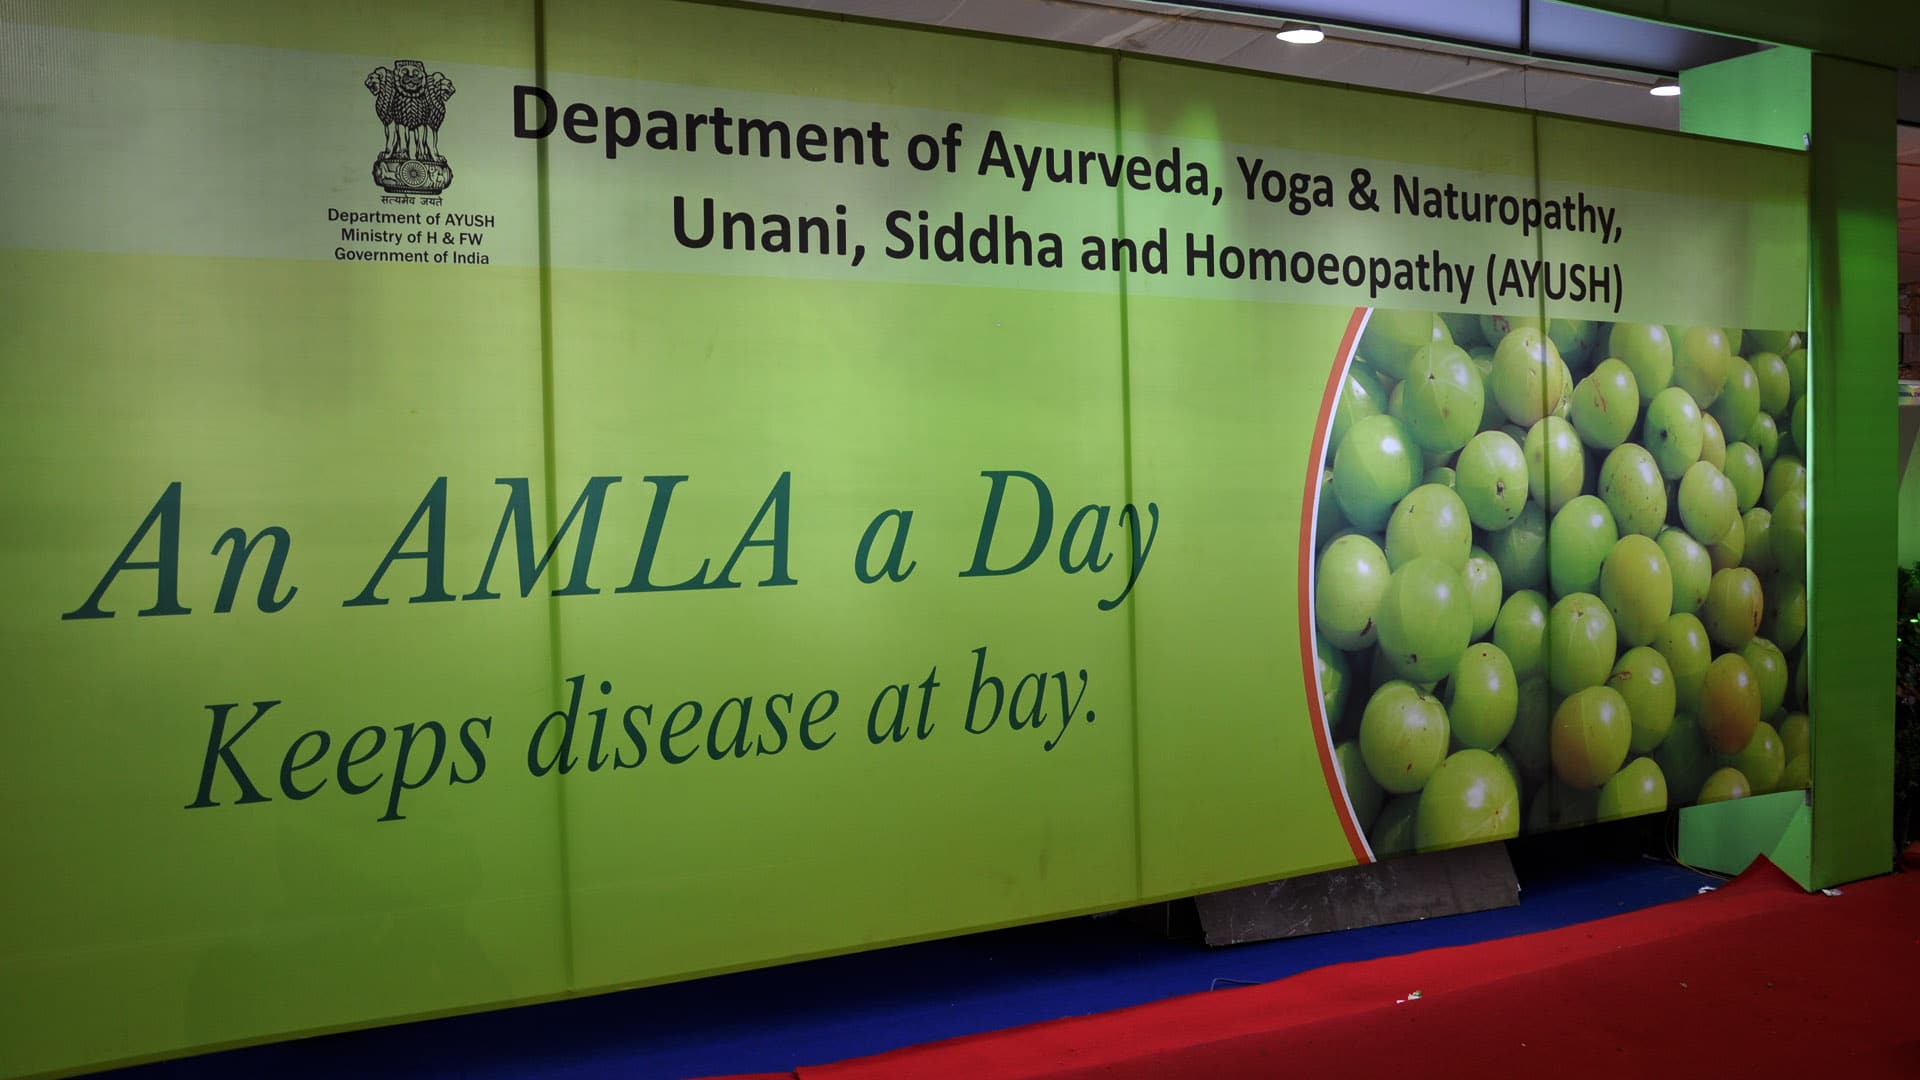 A government banner at Arogya, an Ayurvedic expo funded by the government of India, in December of 2010.